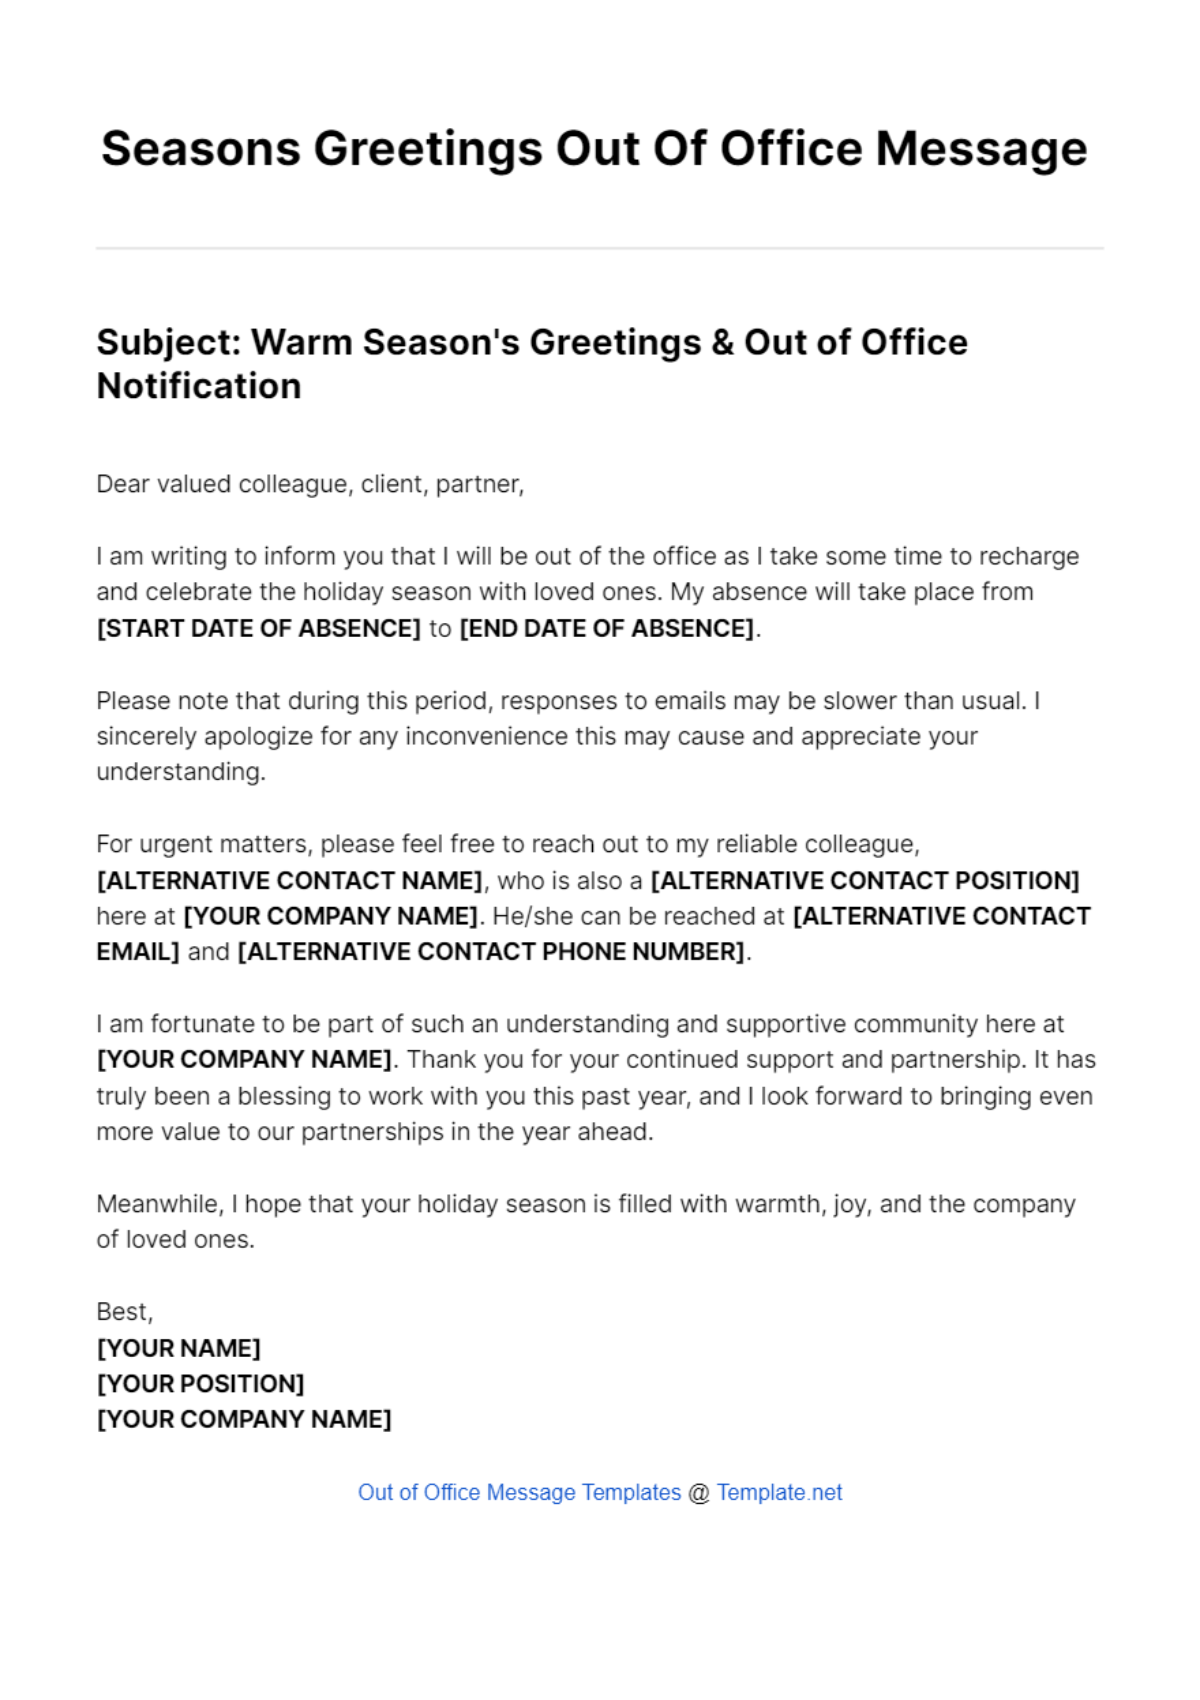 Seasons Greetings Out Of Office Message Template